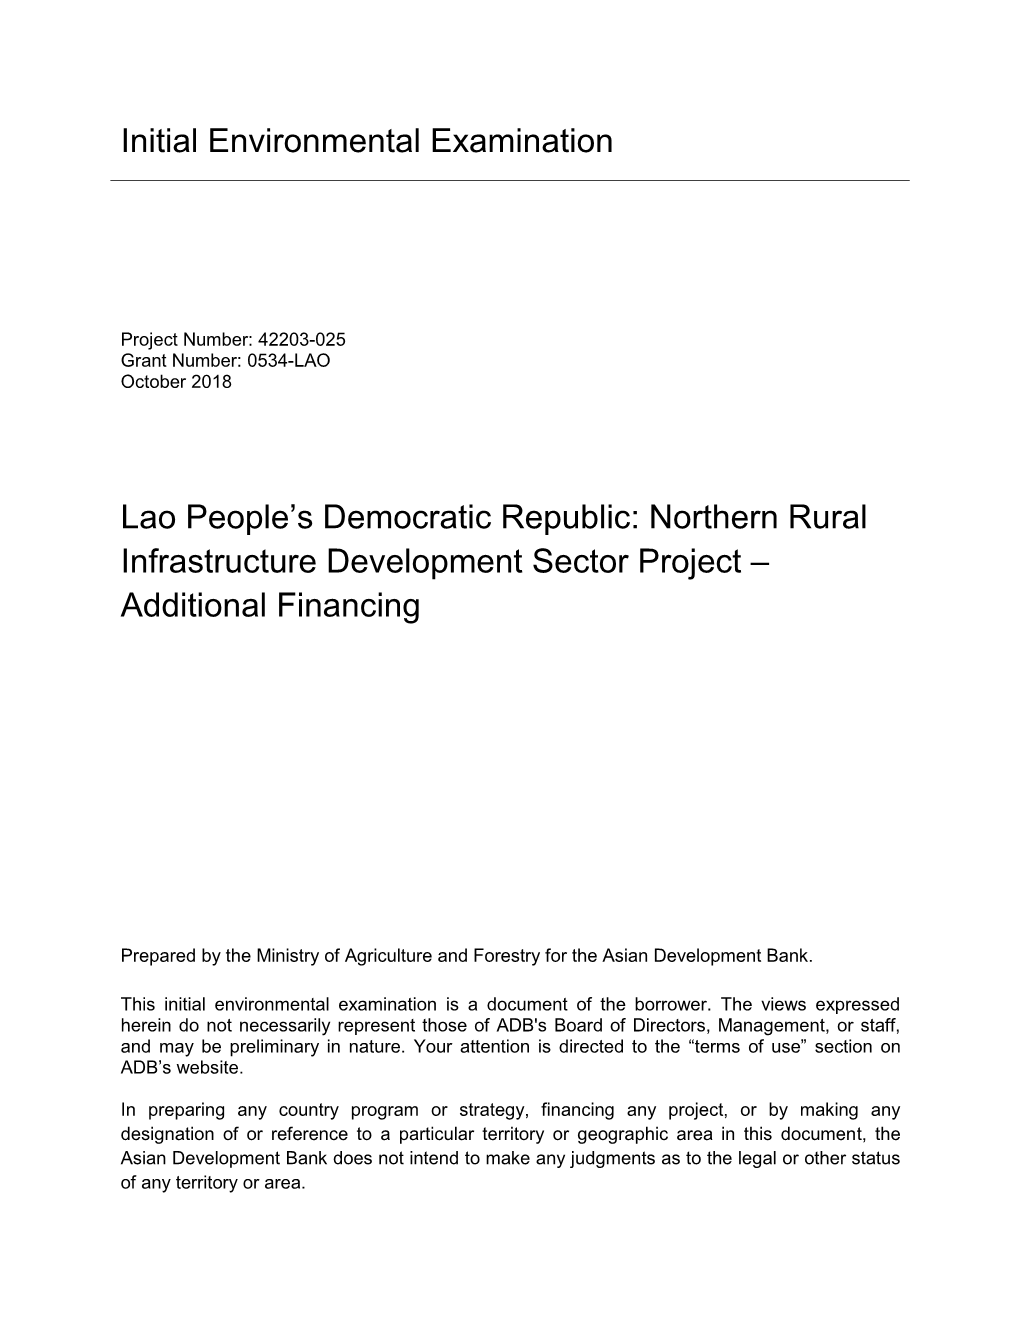 Northern Rural Infrastructure Development Sector Project – Additional Financing